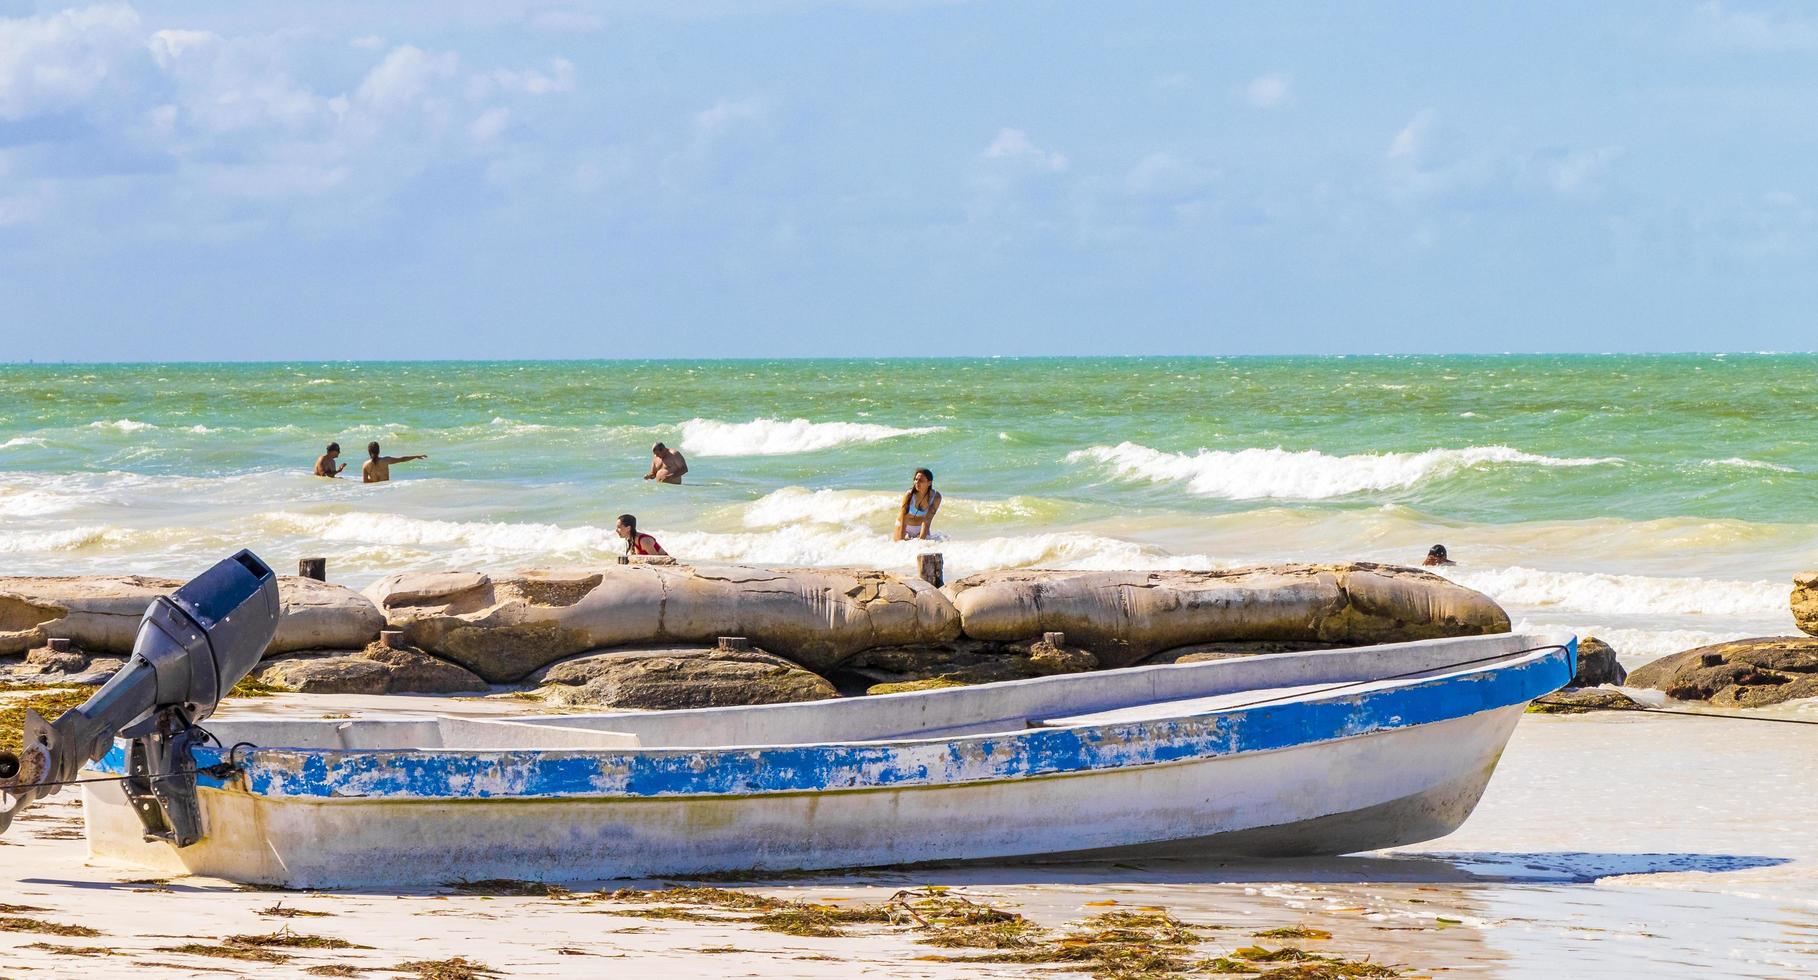 Holbox Mexico 21. December 2021 Beautiful Holbox island beach old blue boat turquoise water Mexico. photo